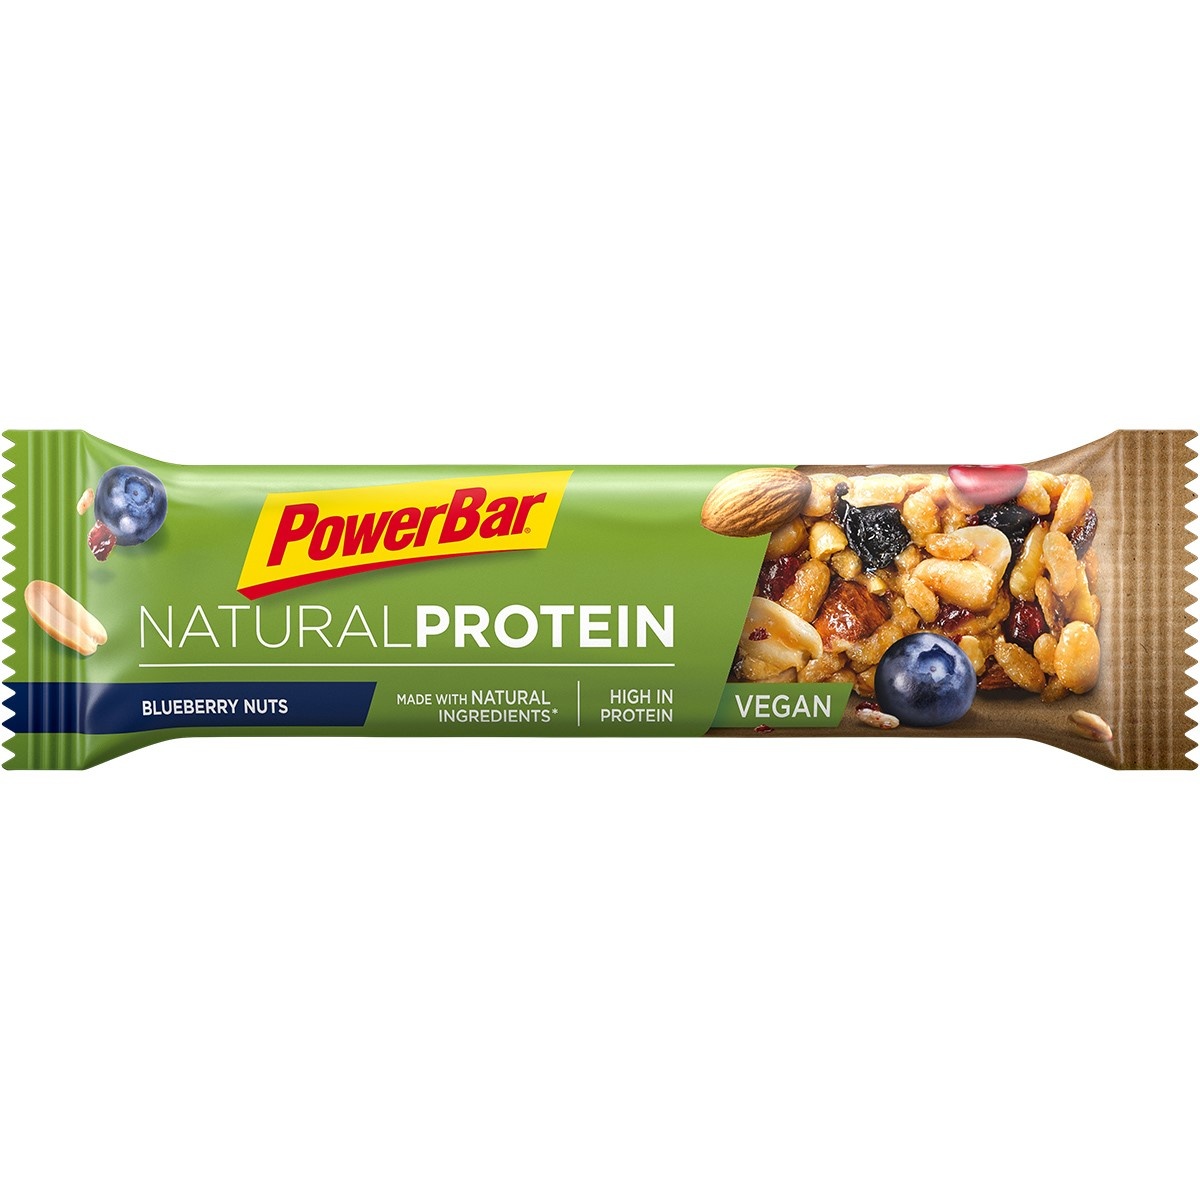  - PowerBar Natural Protein Blueberry Nuts